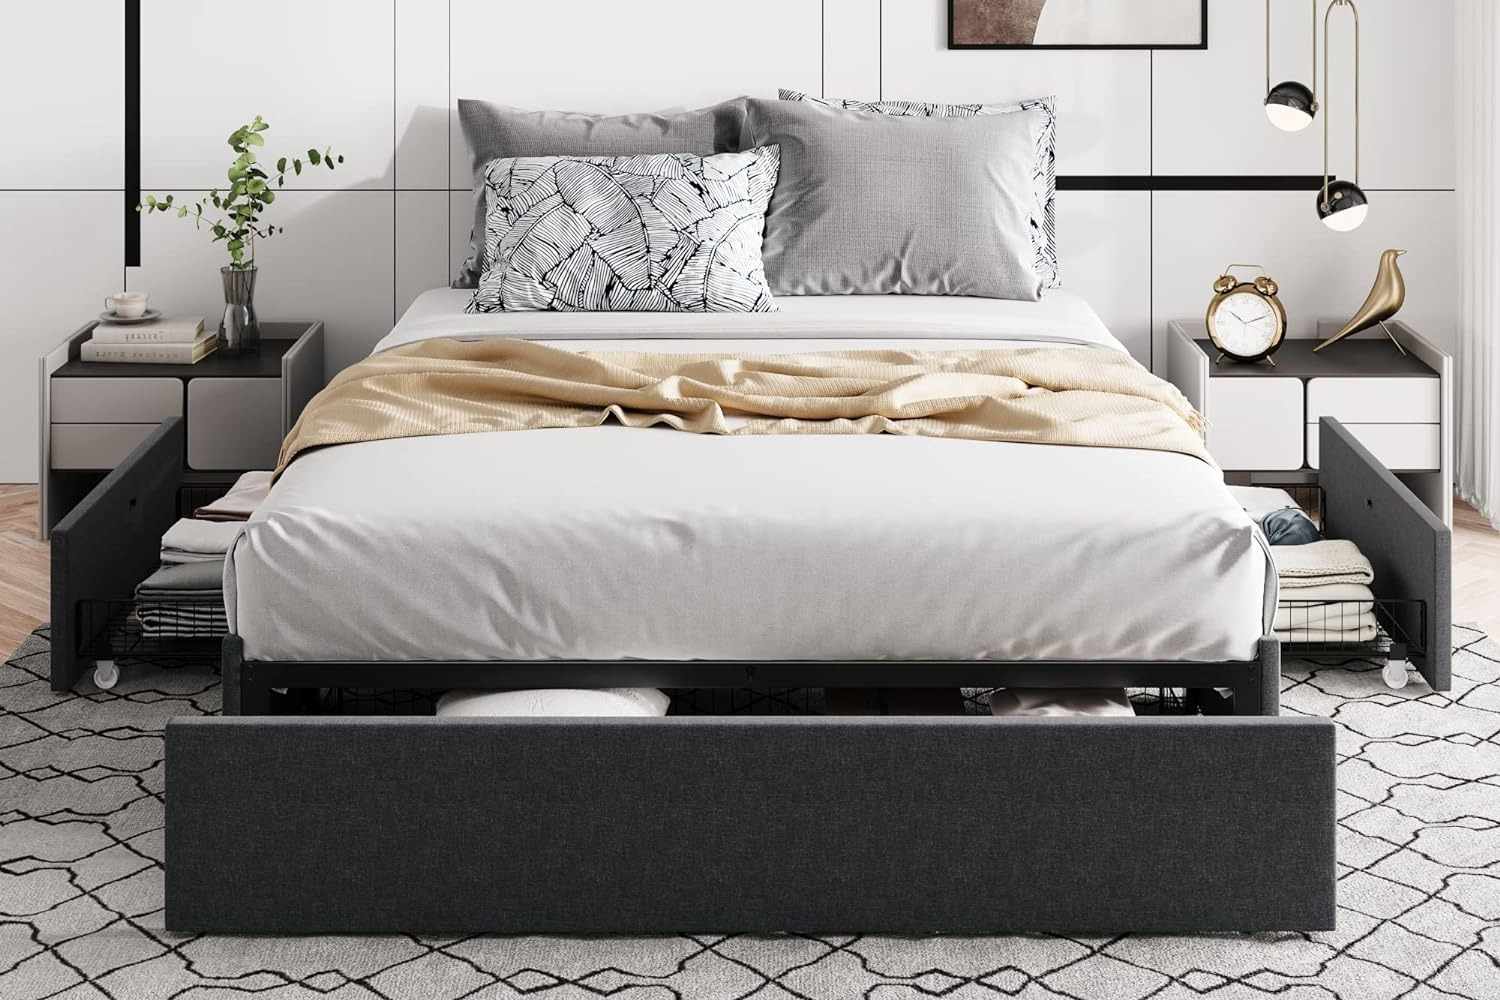 Allewie Queen Size Platform Bed Frame with 3 Storage Drawers, Fabric Upholstered, Wooden Slats Support, No Box Spring Needed, Noise Free, Easy Assembly, Dark Grey